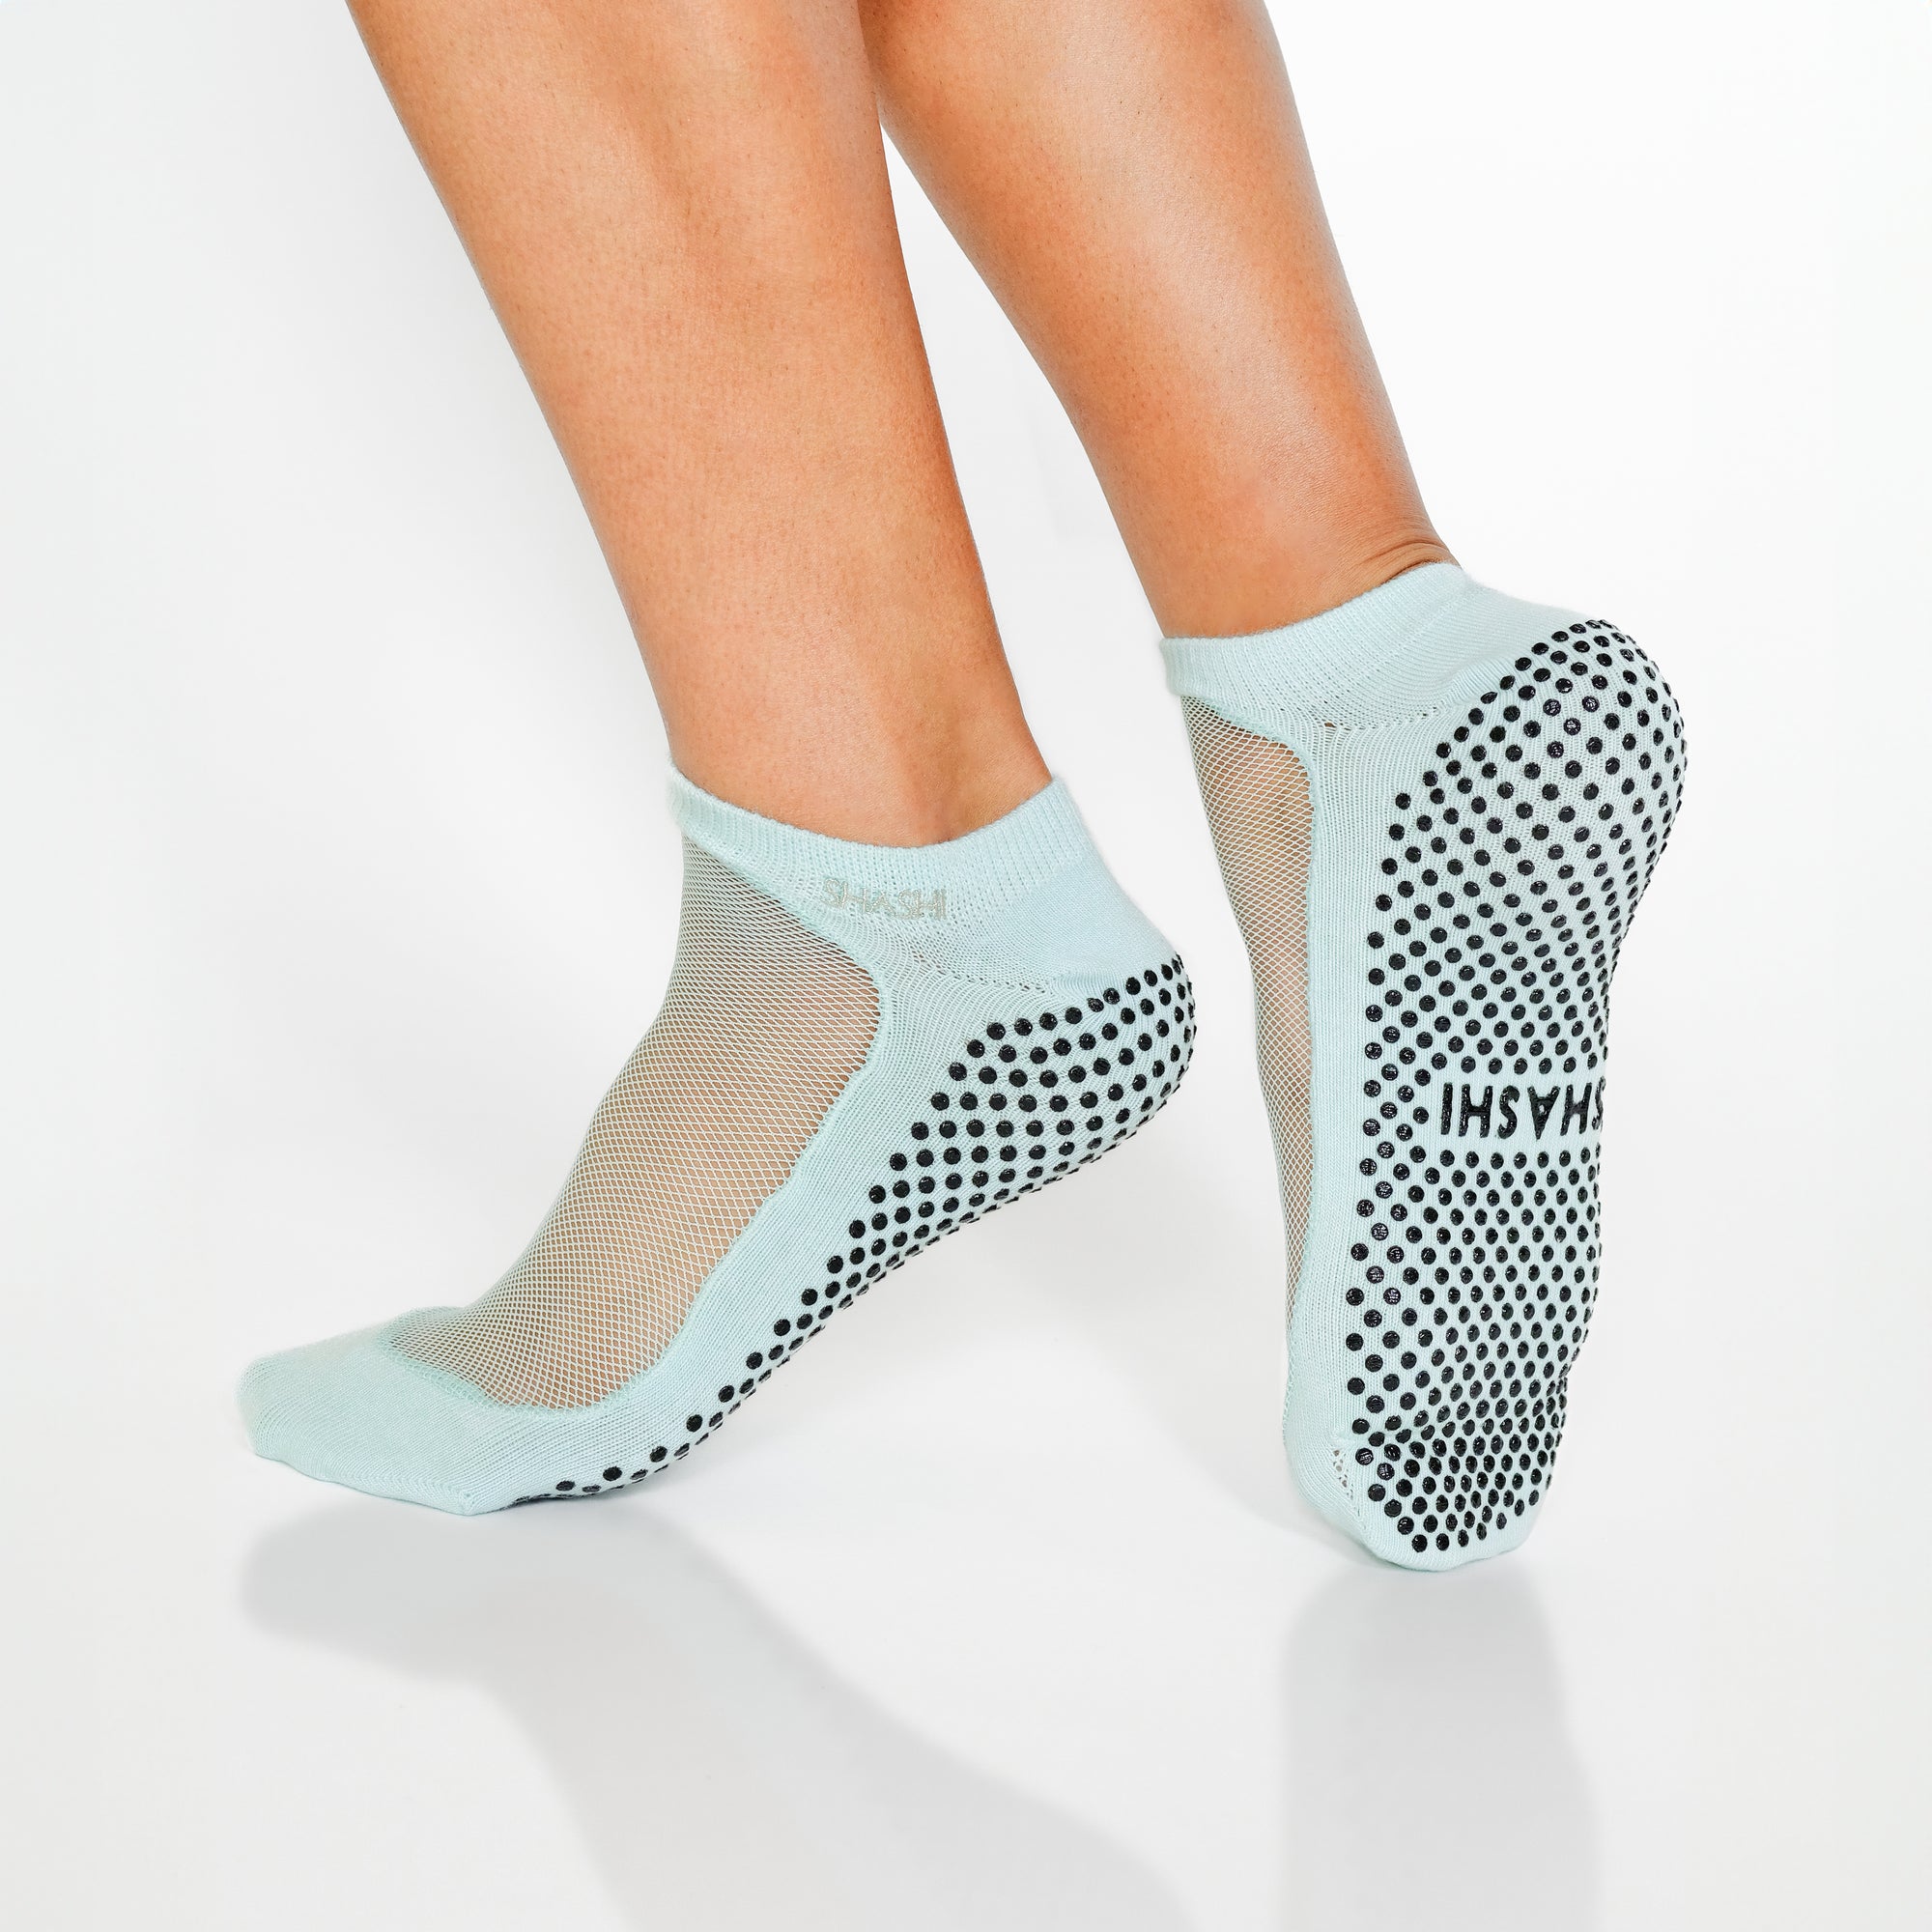 SHASHI Sweet Mary Jane Grip Socks for Women — Non Slip Socks w/Cut Out-Top  — Pilates Socks with Grips for Barre, Yoga & More